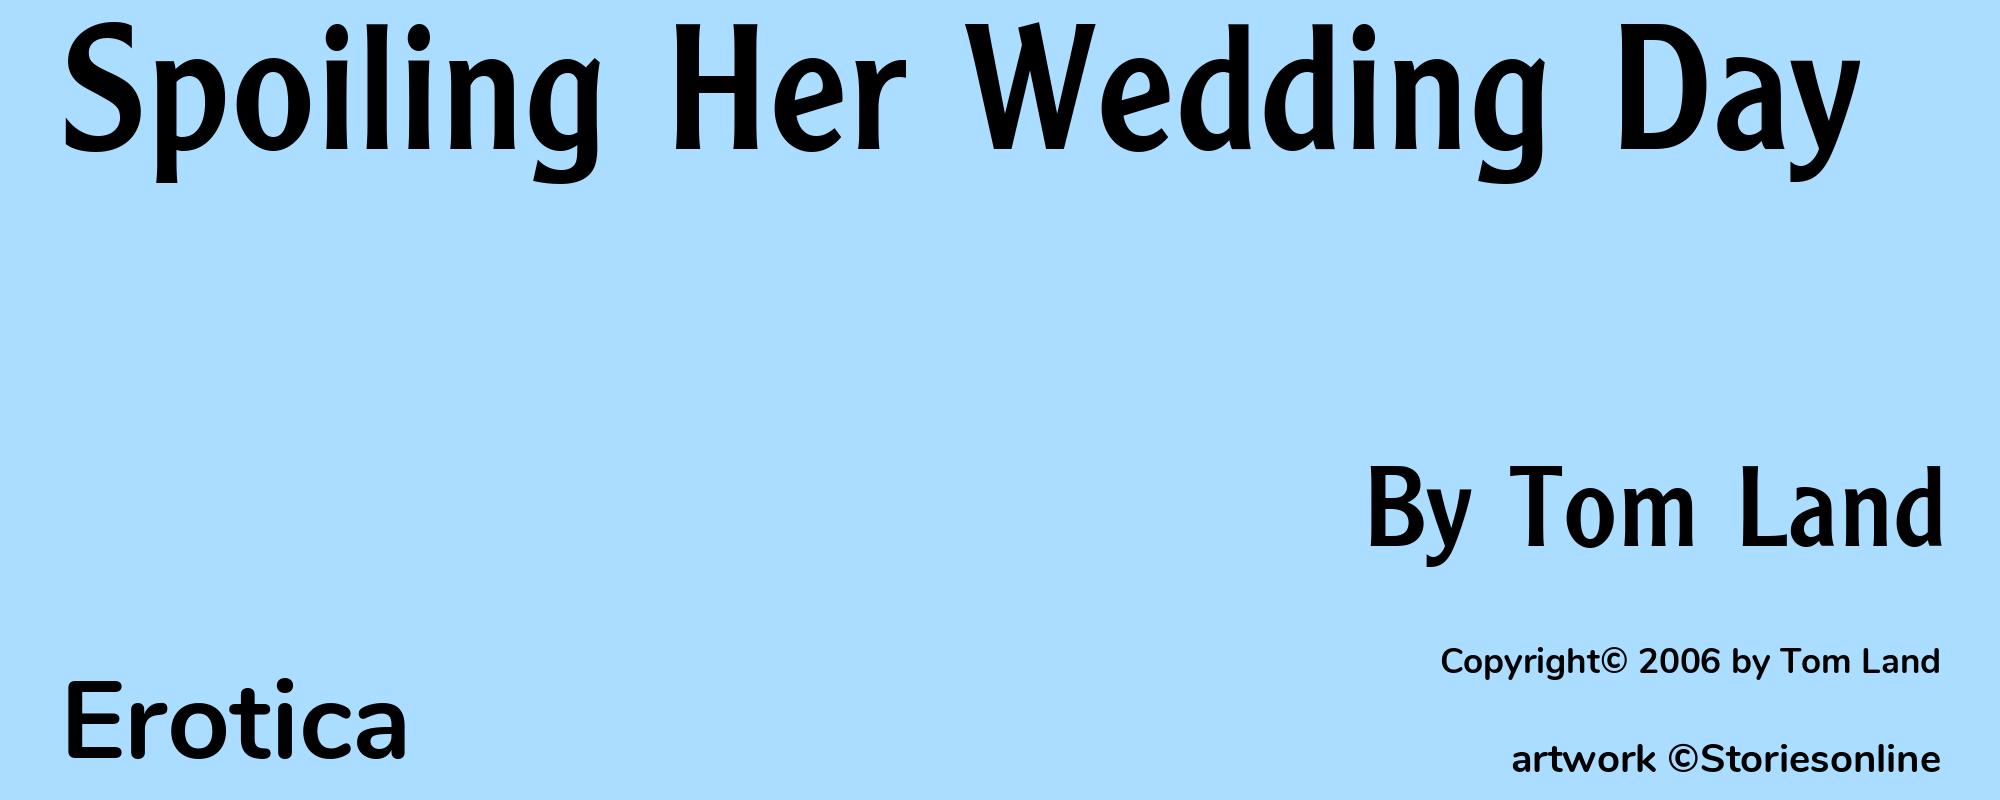 Spoiling Her Wedding Day - Cover